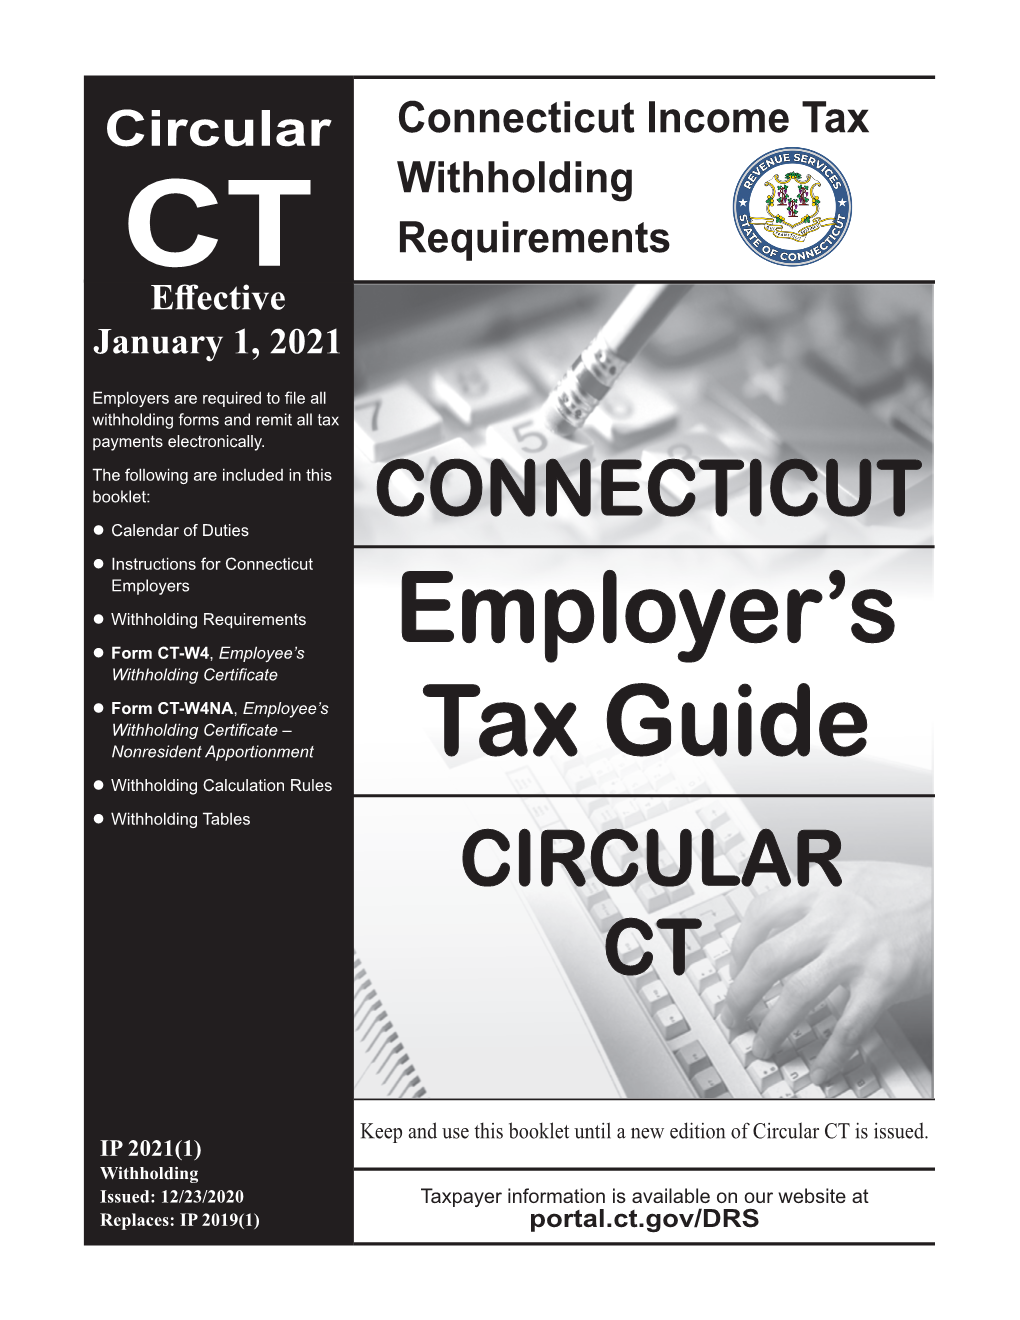 IP 2021(1), Connecticut Circular CT Employer's Withholding Guide